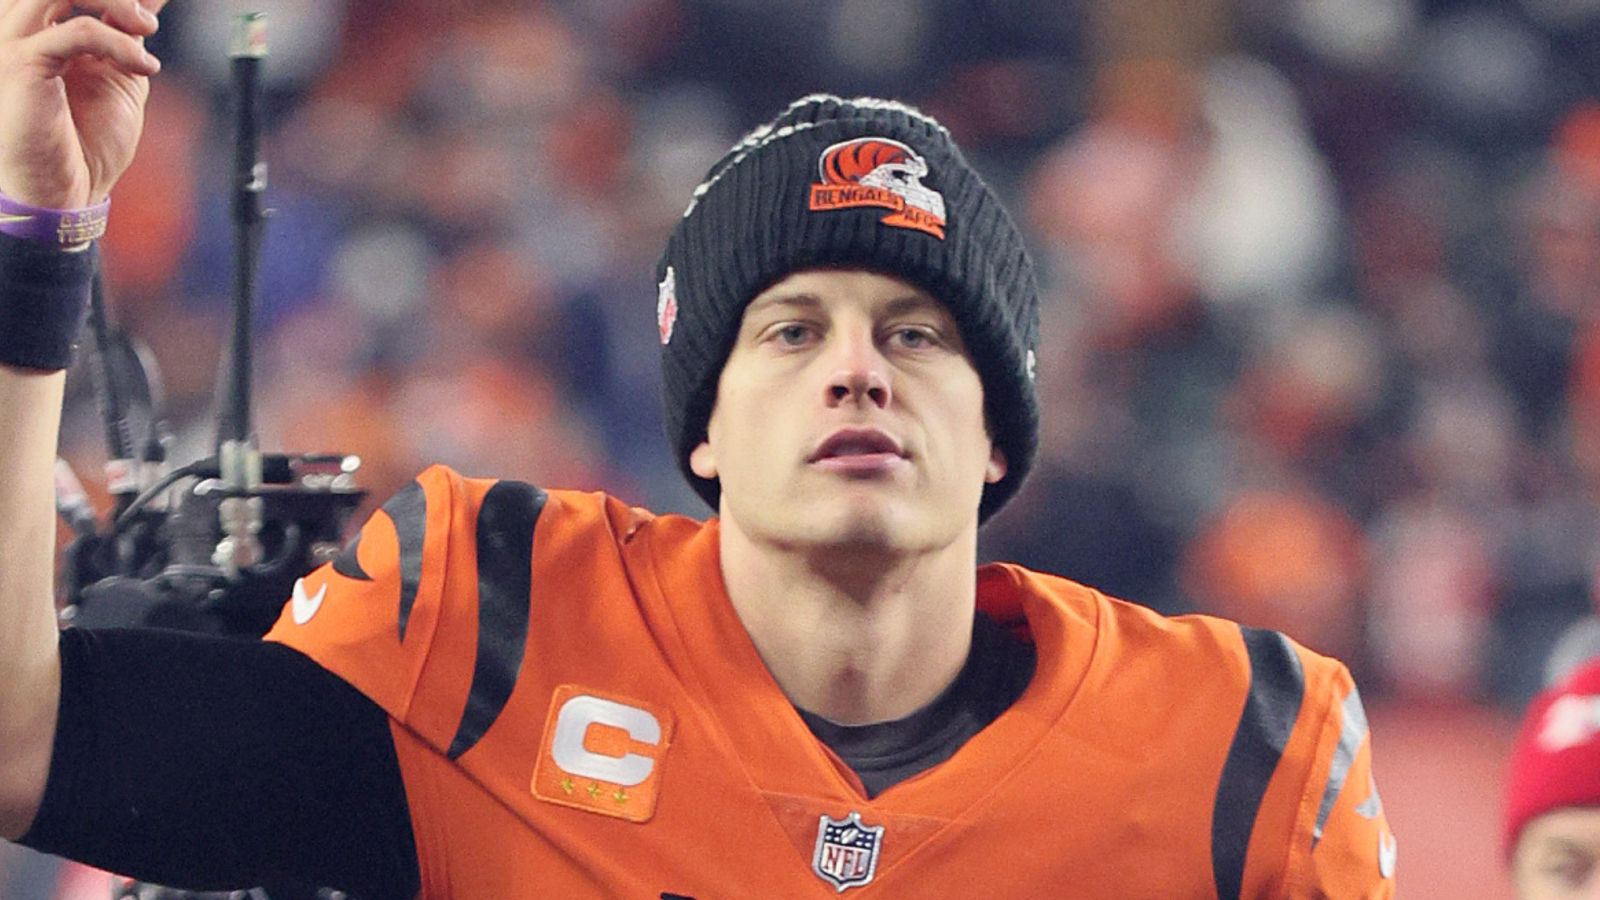 Joe Burrow: Cincinnati Bengals quarterback becomes NFL’s highest paid player after agreeing to new $55m-a-year deal | NFL News